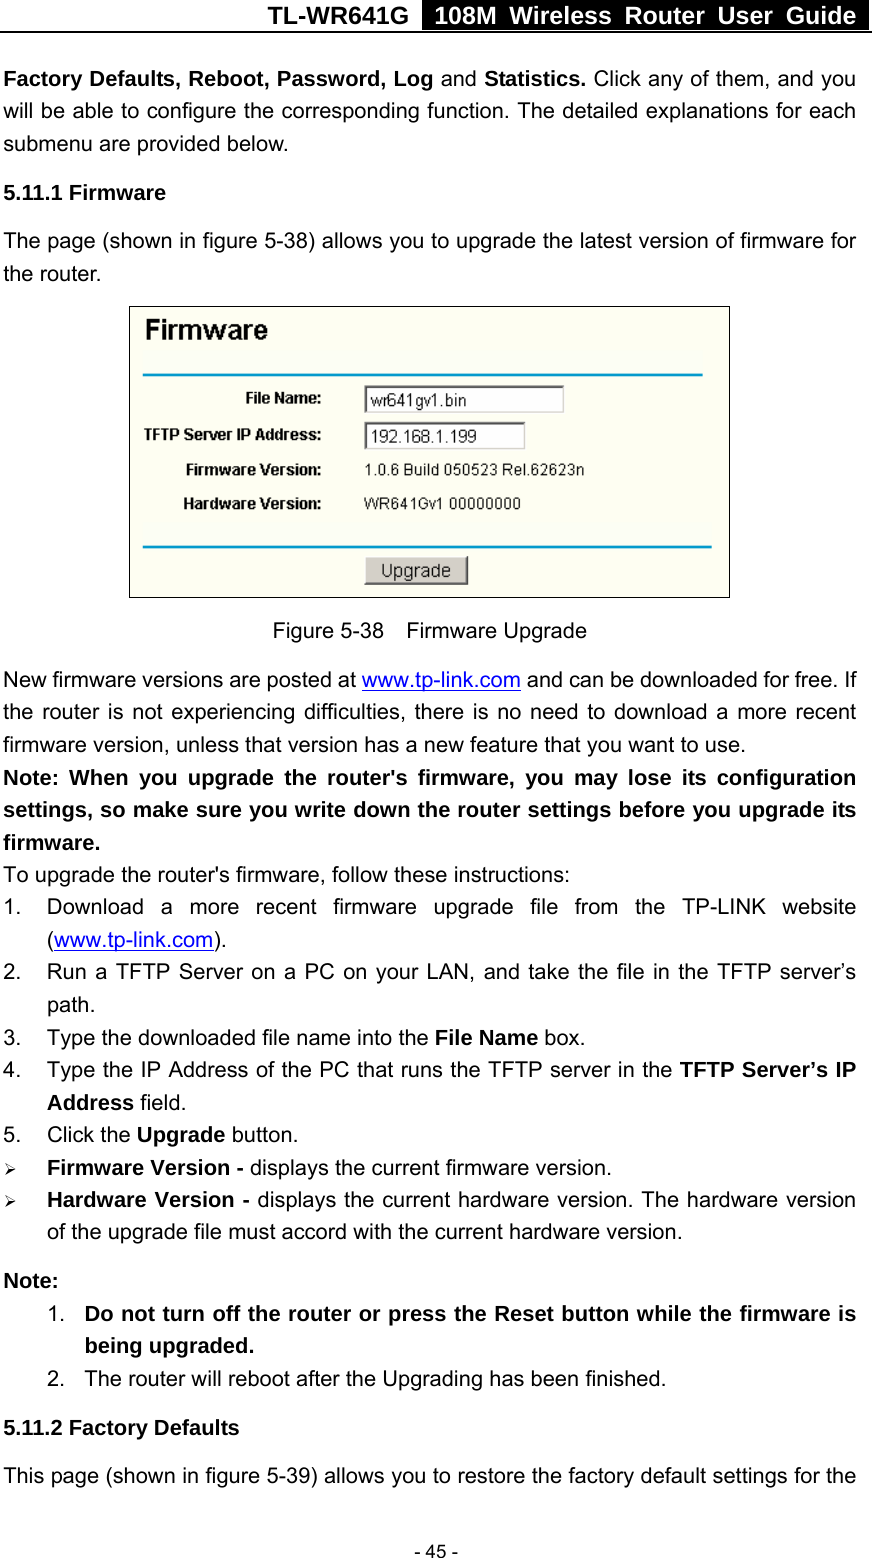 TL-WR641G   108M Wireless Router User Guide   - 45 -Factory Defaults, Reboot, Password, Log and Statistics. Click any of them, and you will be able to configure the corresponding function. The detailed explanations for each submenu are provided below. 5.11.1 Firmware The page (shown in figure 5-38) allows you to upgrade the latest version of firmware for the router.  Figure 5-38  Firmware Upgrade New firmware versions are posted at www.tp-link.com and can be downloaded for free. If the router is not experiencing difficulties, there is no need to download a more recent firmware version, unless that version has a new feature that you want to use. Note: When you upgrade the router&apos;s firmware, you may lose its configuration settings, so make sure you write down the router settings before you upgrade its firmware. To upgrade the router&apos;s firmware, follow these instructions: 1.  Download a more recent firmware upgrade file from the TP-LINK website (www.tp-link.com).  2.  Run a TFTP Server on a PC on your LAN, and take the file in the TFTP server’s path. 3.  Type the downloaded file name into the File Name box. 4.  Type the IP Address of the PC that runs the TFTP server in the TFTP Server’s IP Address field. 5. Click the Upgrade button.   ¾ Firmware Version - displays the current firmware version. ¾ Hardware Version - displays the current hardware version. The hardware version of the upgrade file must accord with the current hardware version. Note:  1.  Do not turn off the router or press the Reset button while the firmware is being upgraded. 2.  The router will reboot after the Upgrading has been finished. 5.11.2 Factory Defaults This page (shown in figure 5-39) allows you to restore the factory default settings for the 